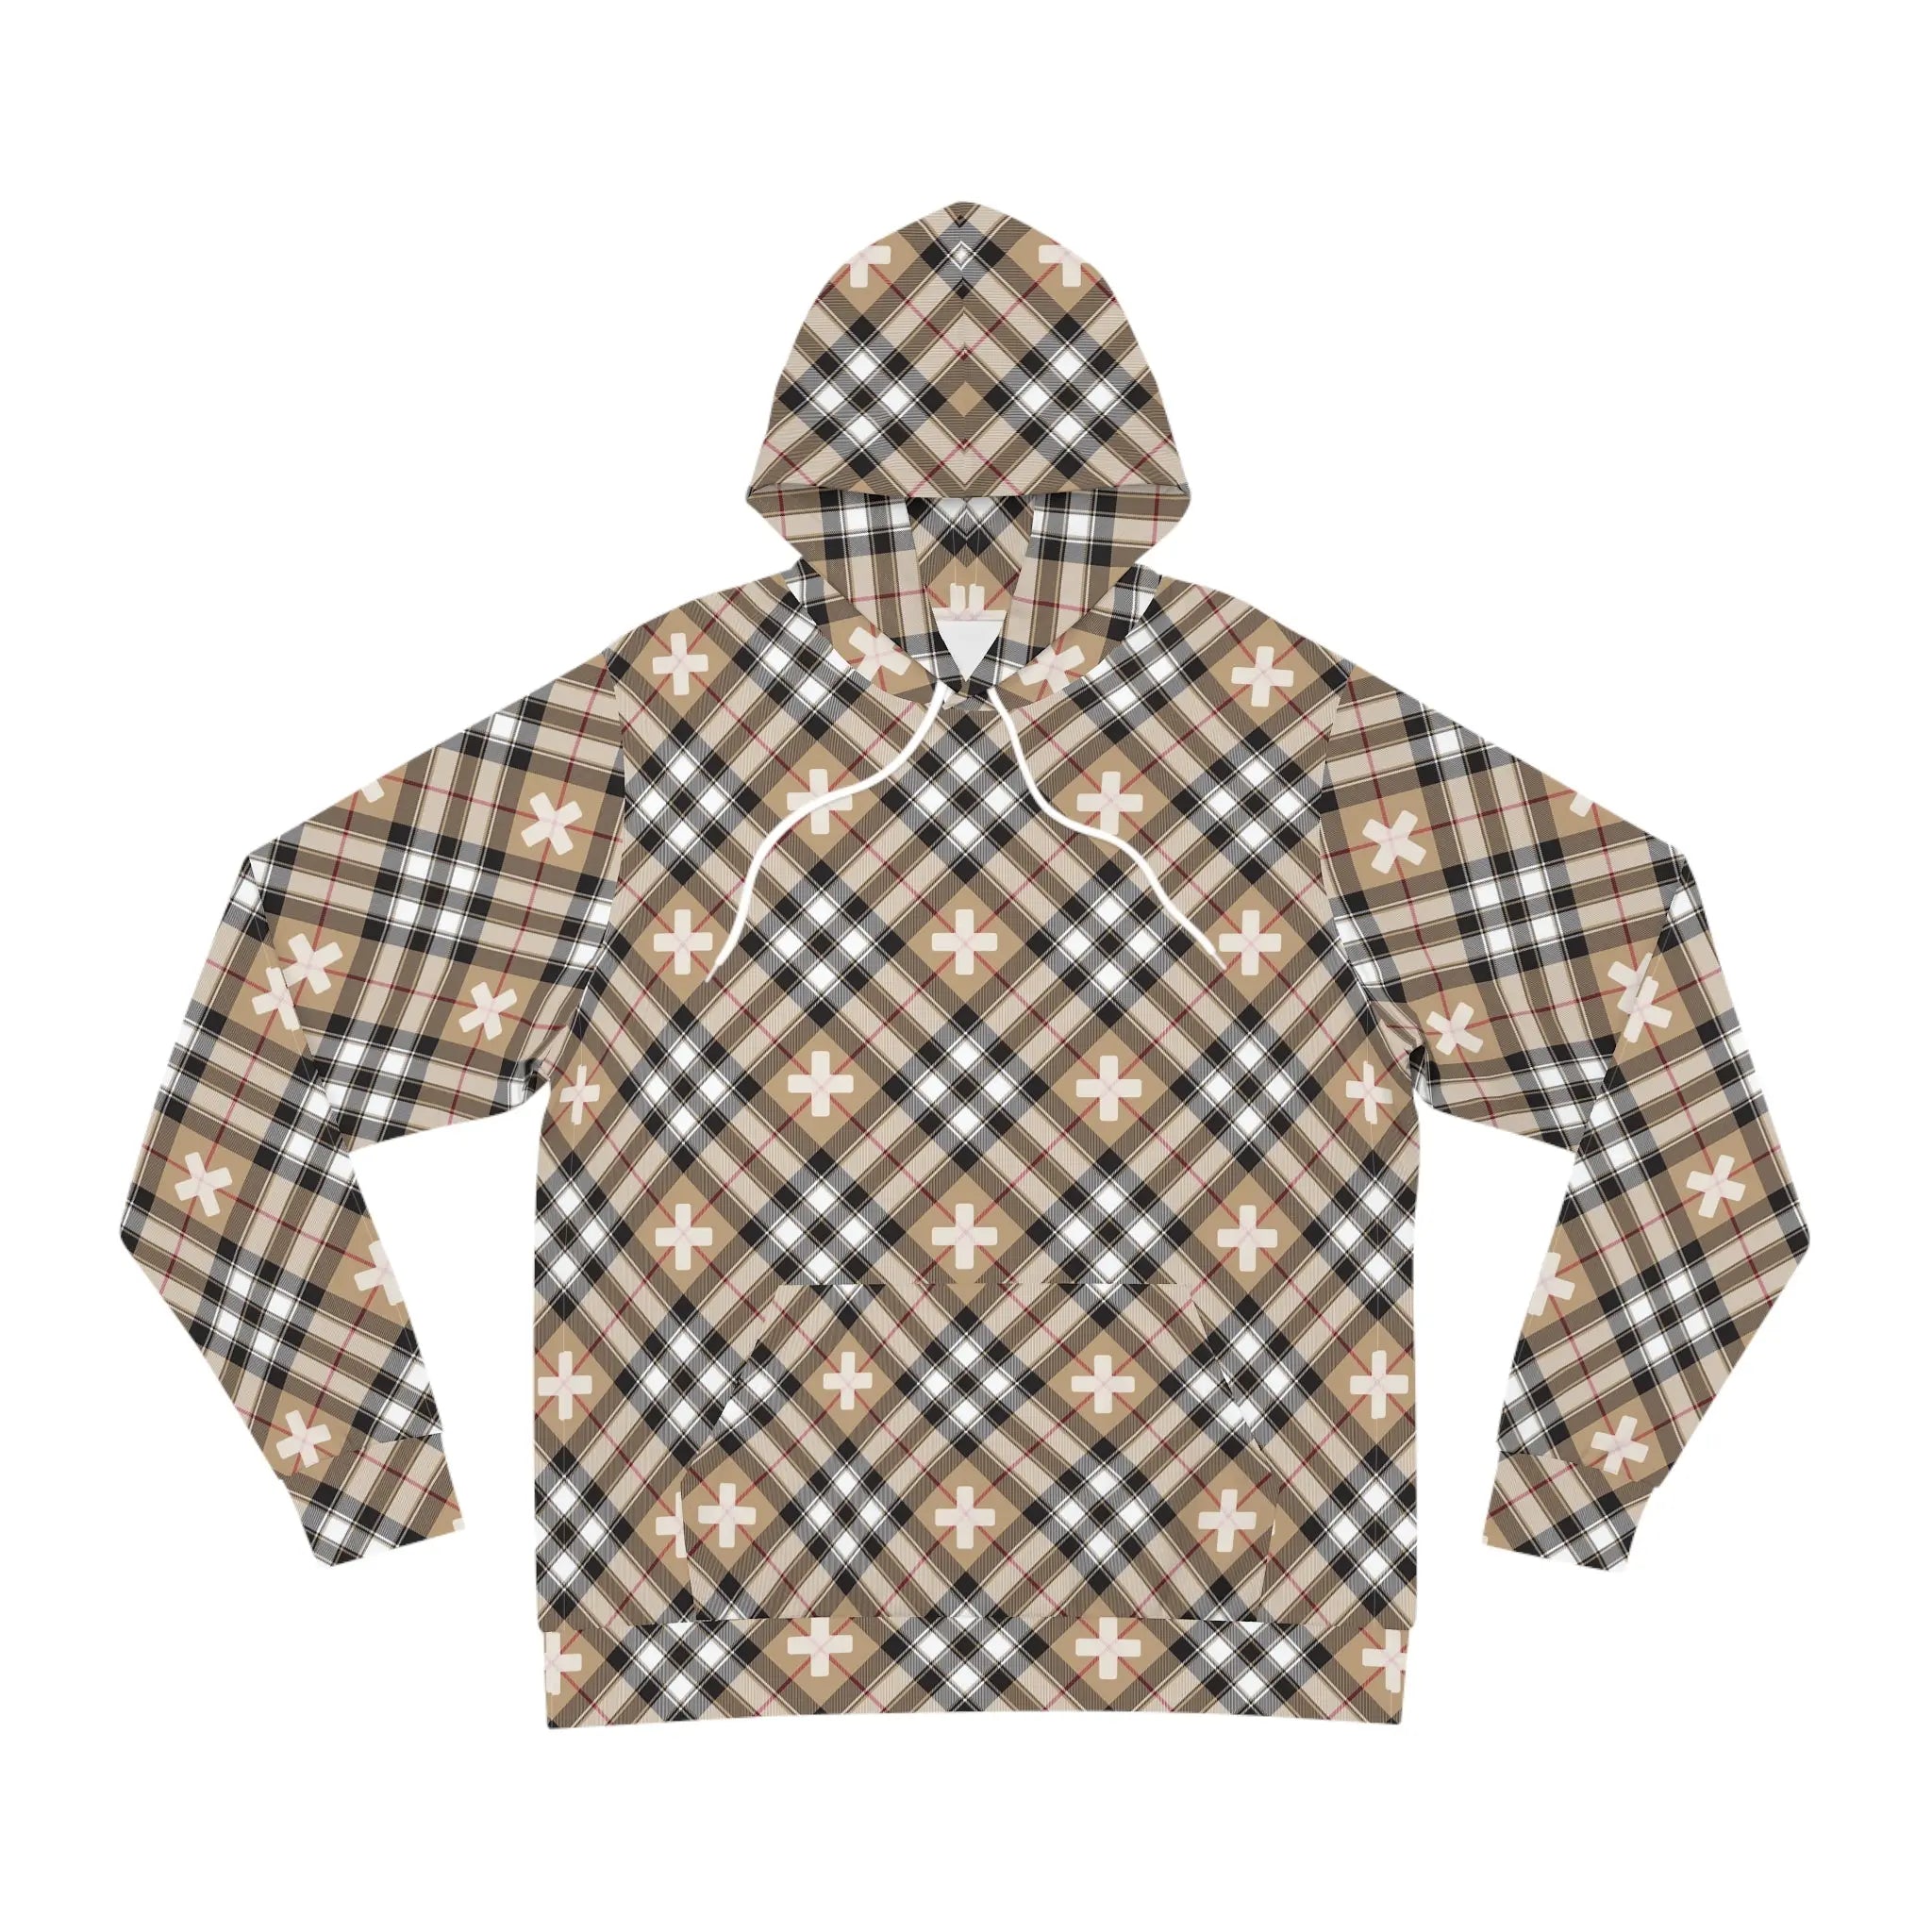  Beige Plaid Plus Signs Unisex Fashion Hoodie, Hooded Sweater, Streetwear Hooded Sweatshirt All Over PrintsMSeamthreadcolorautomaticallymatchedtodesign